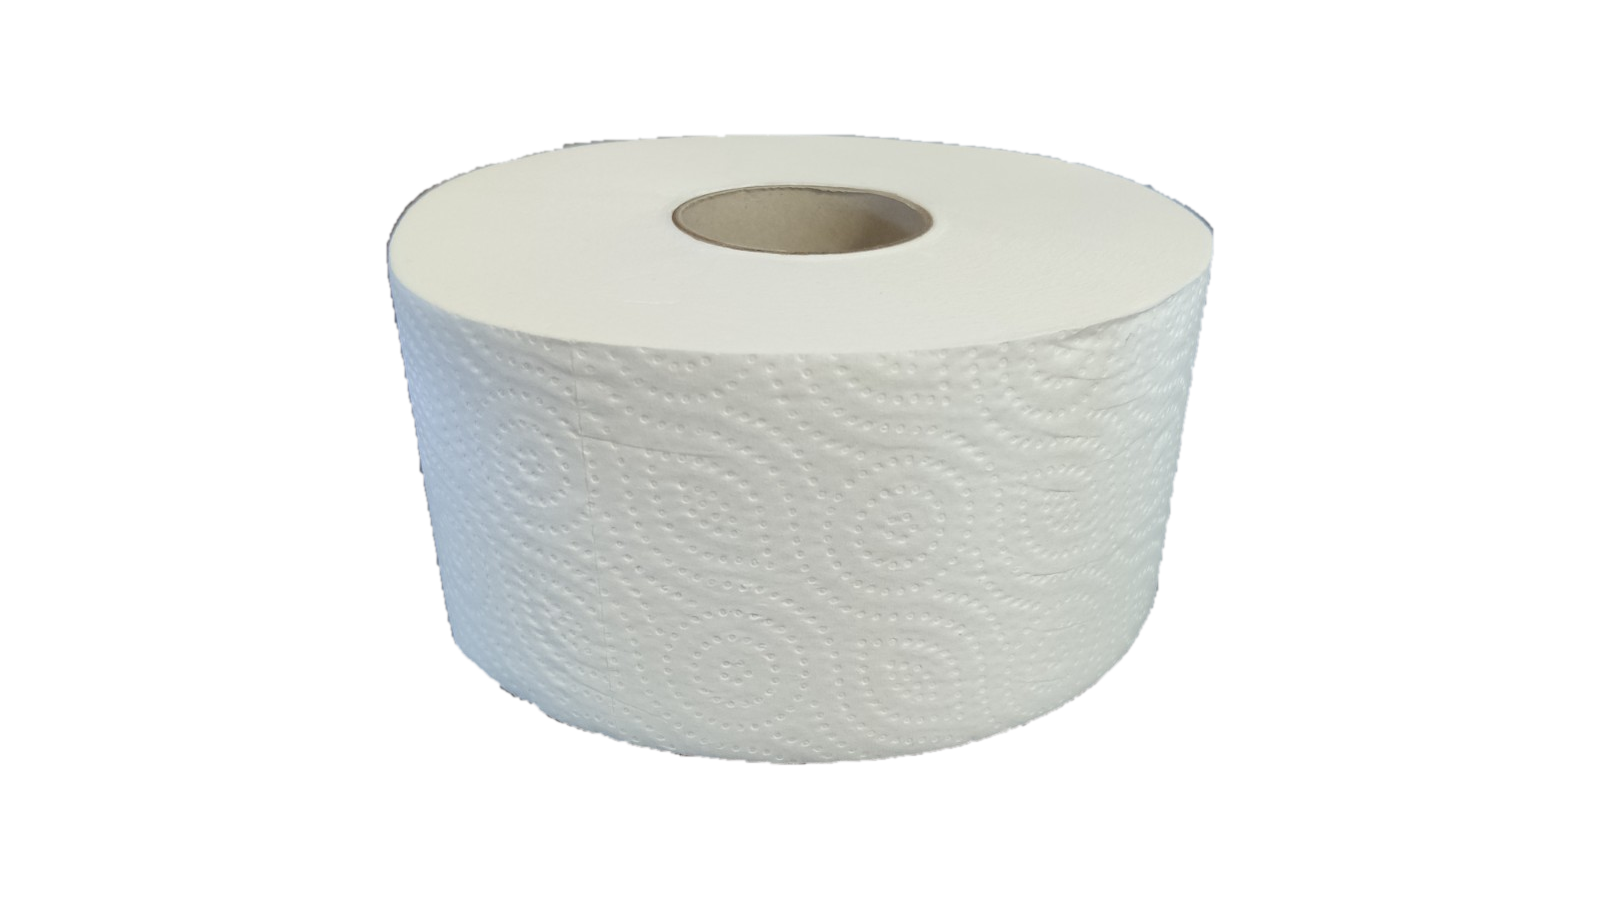 JUMBO MEDIUM Toilet Paper - Reus - Producer of ecological paper towels,  solid cardboard packaging and restaurant napkins.